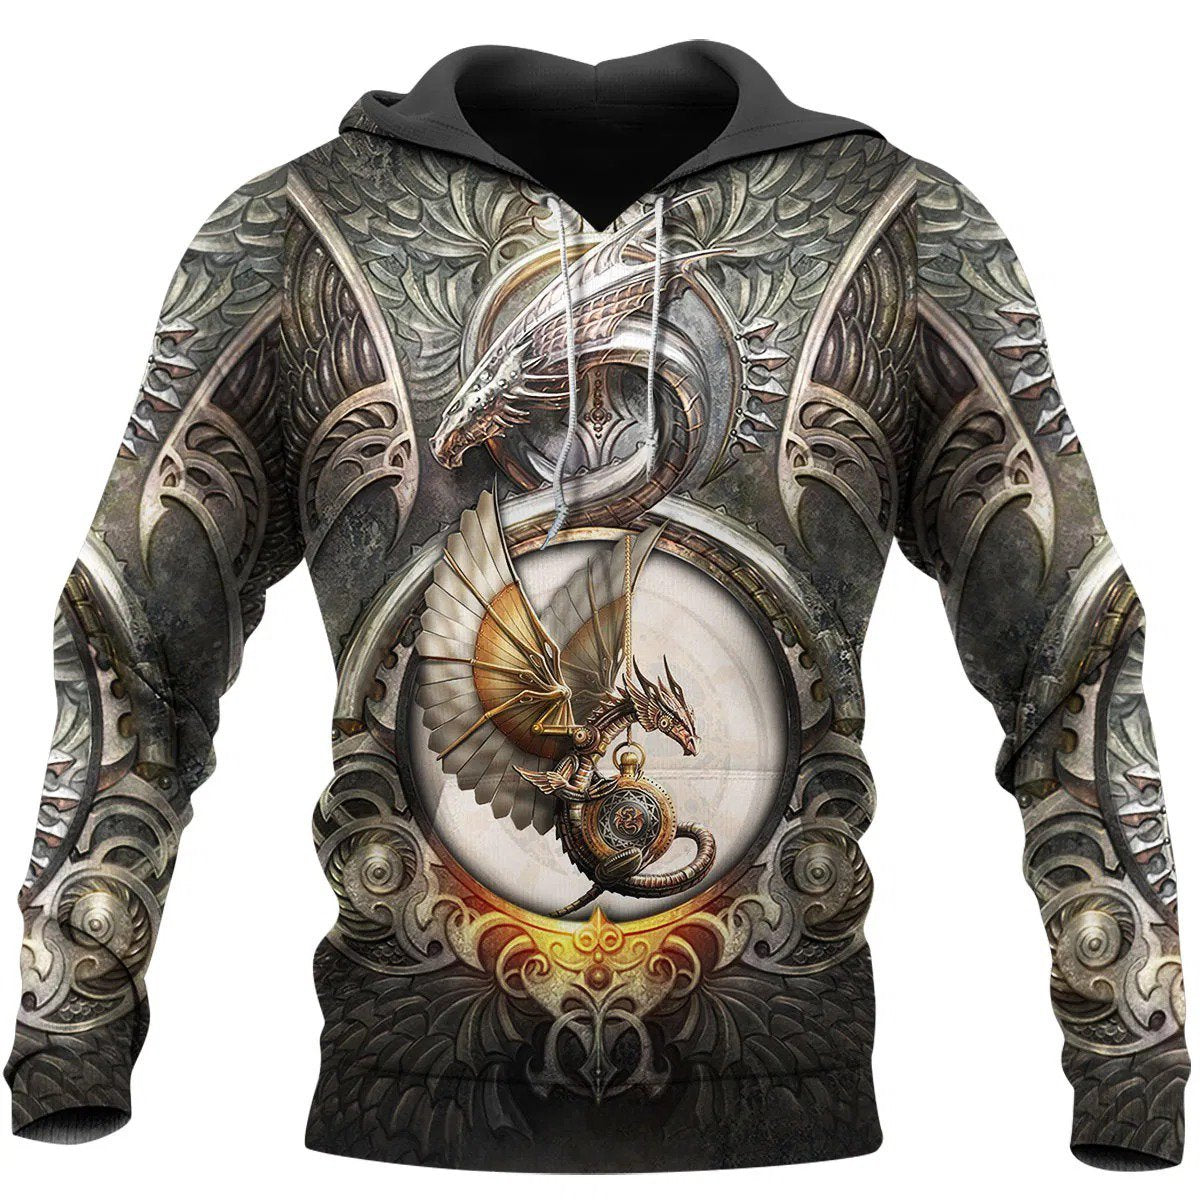 3D Tattoo And Dungeon Dragon Hoodie T Shirt For Men And Women Nm050955 ...